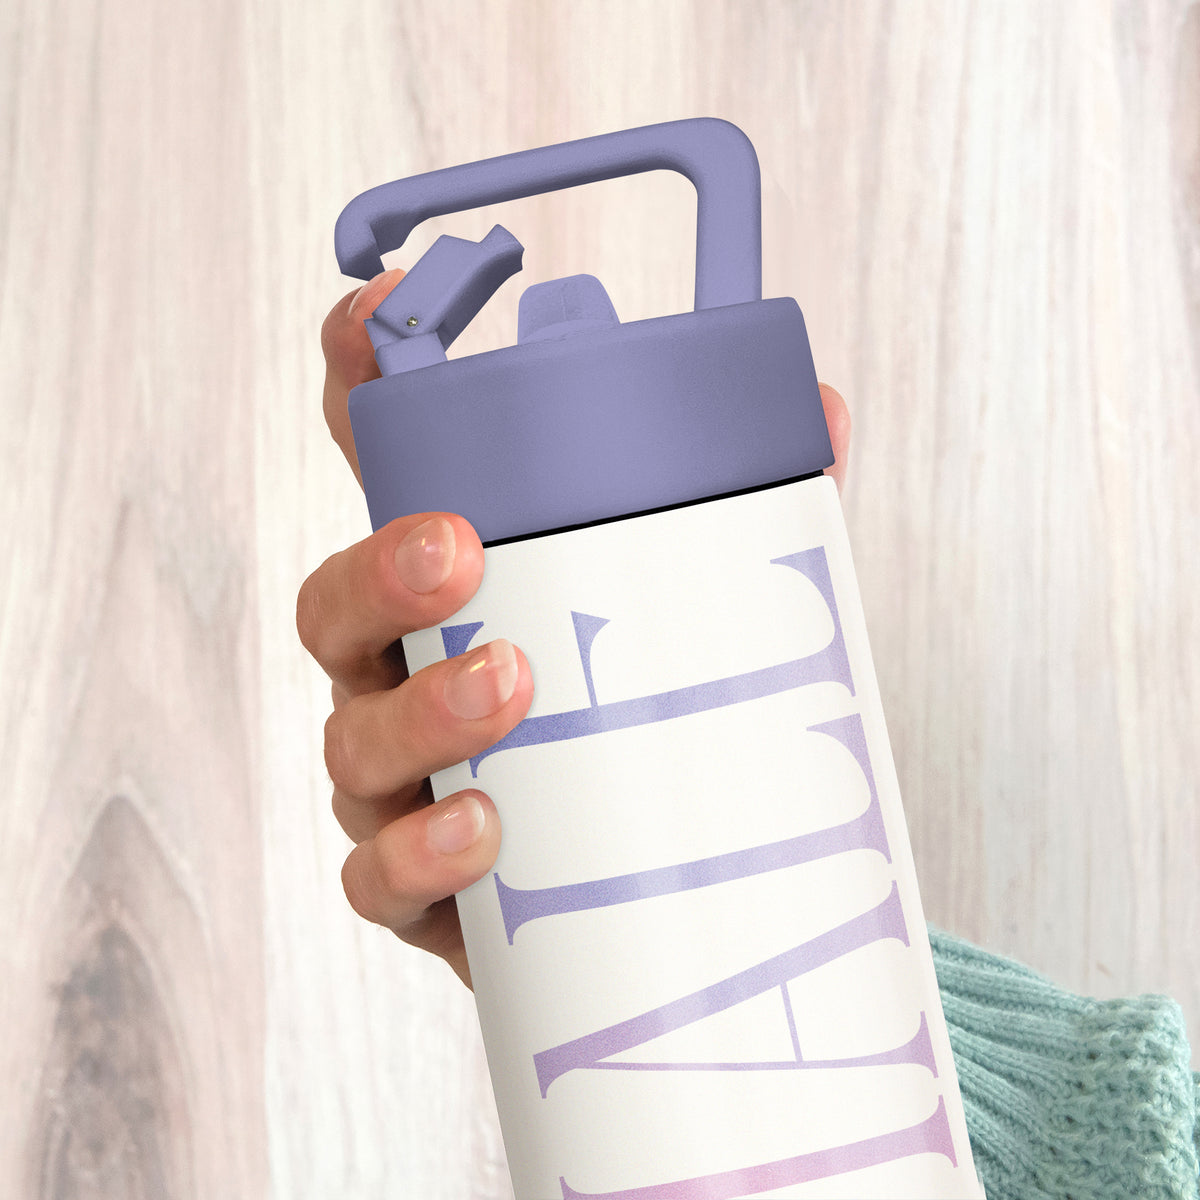 Inhale Exhale Snap-Hook Water Bottle with Straw